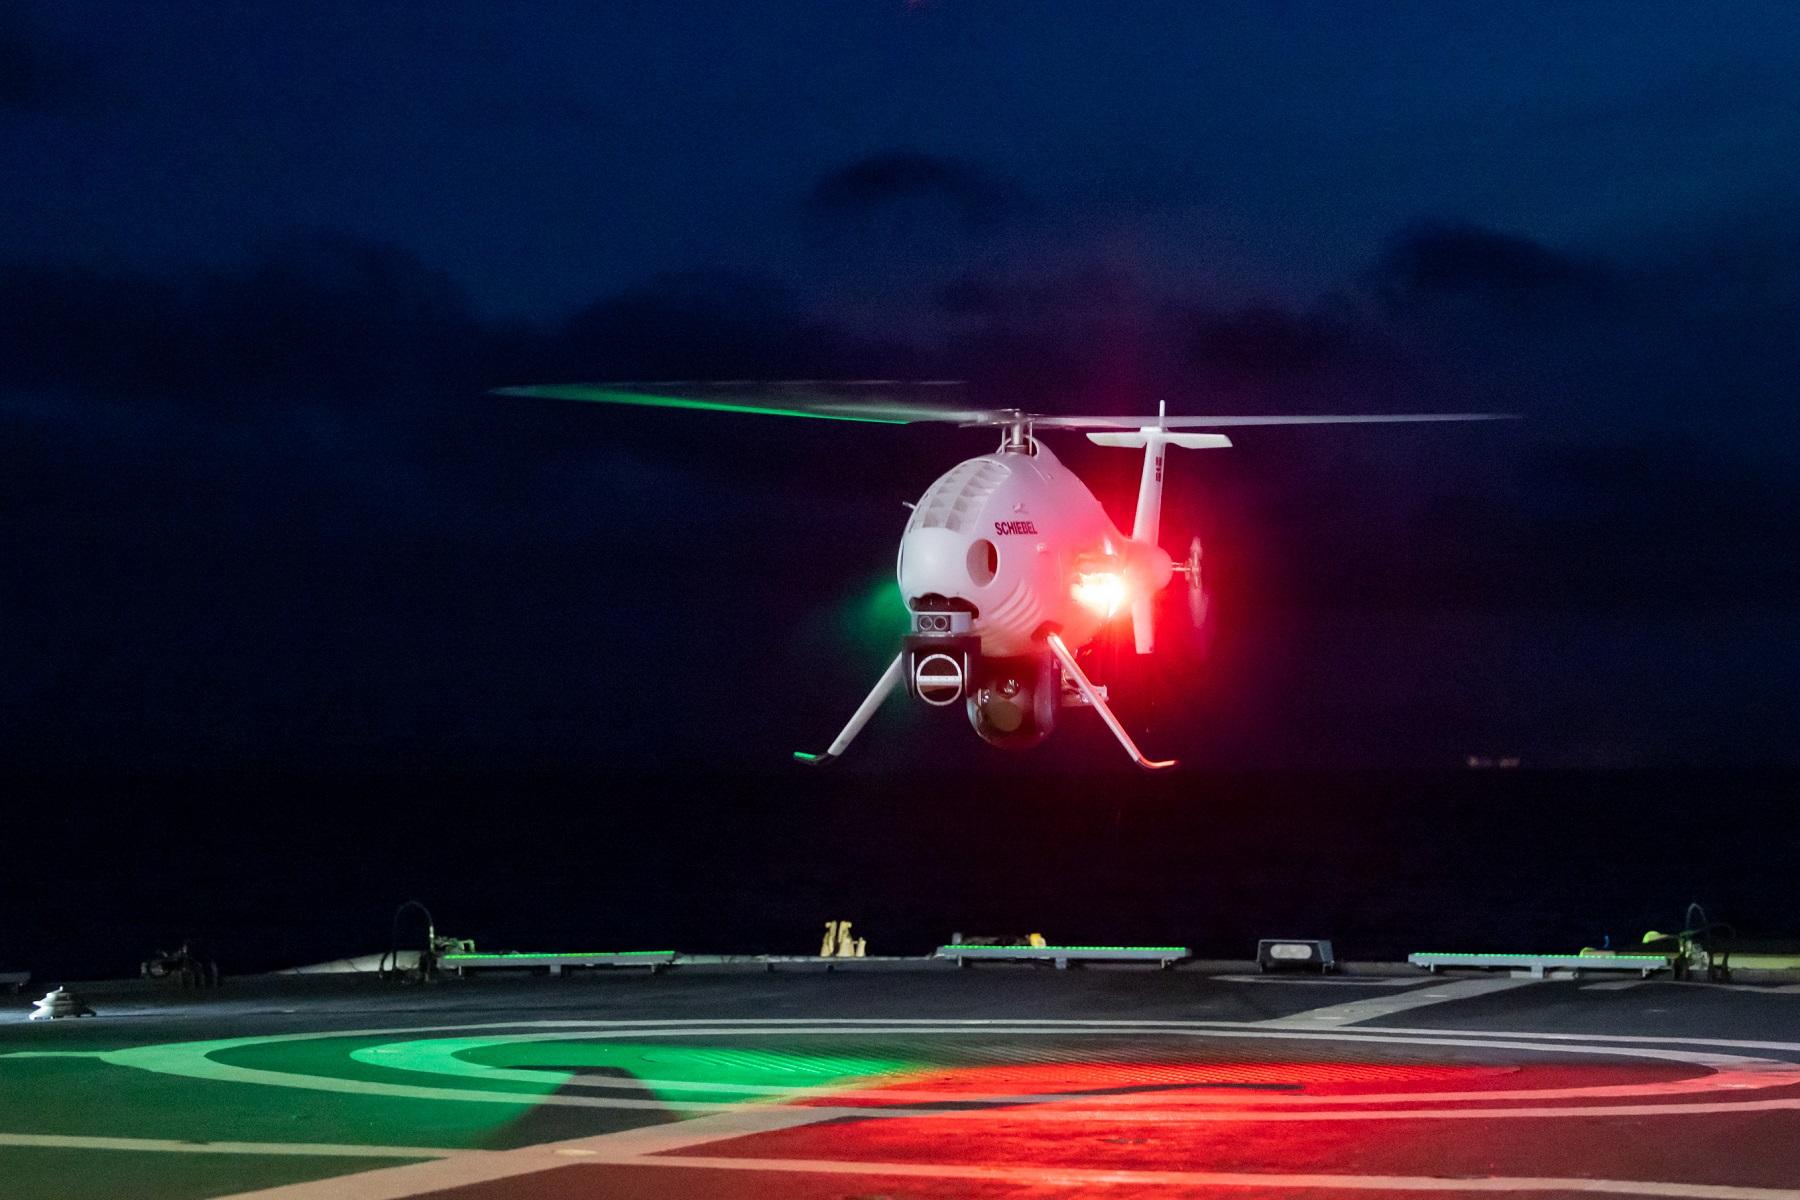 Schiebel CAMCOPTER S-100 Unmanned Air System Tests Search and Rescue Trials in the Arctic